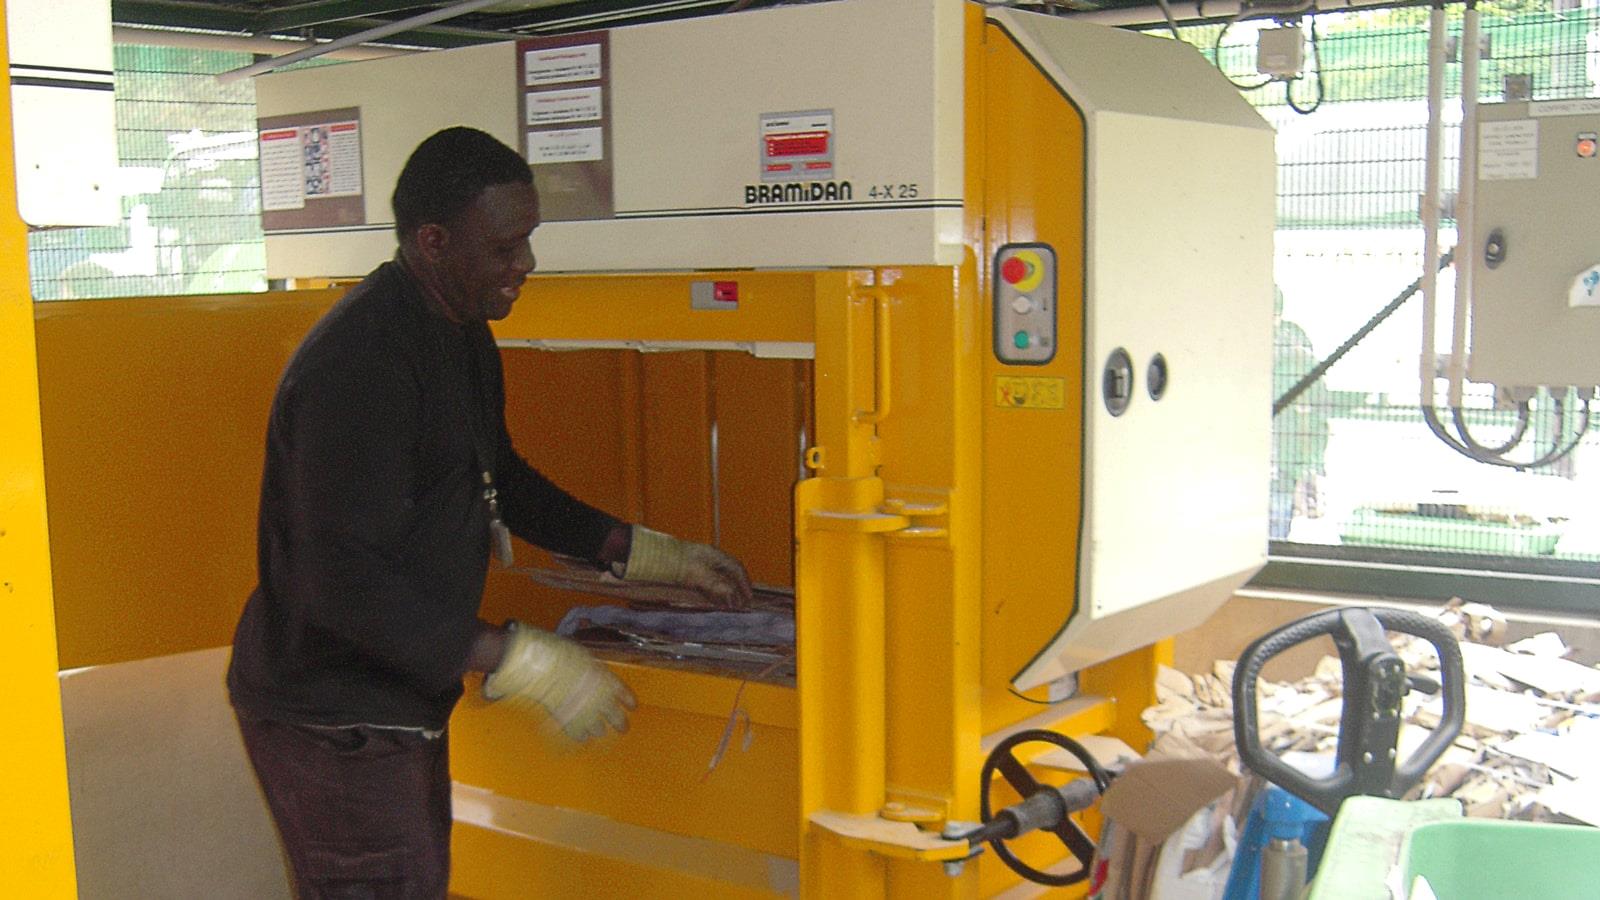 Employee with gloves fills cardboard waste into baler